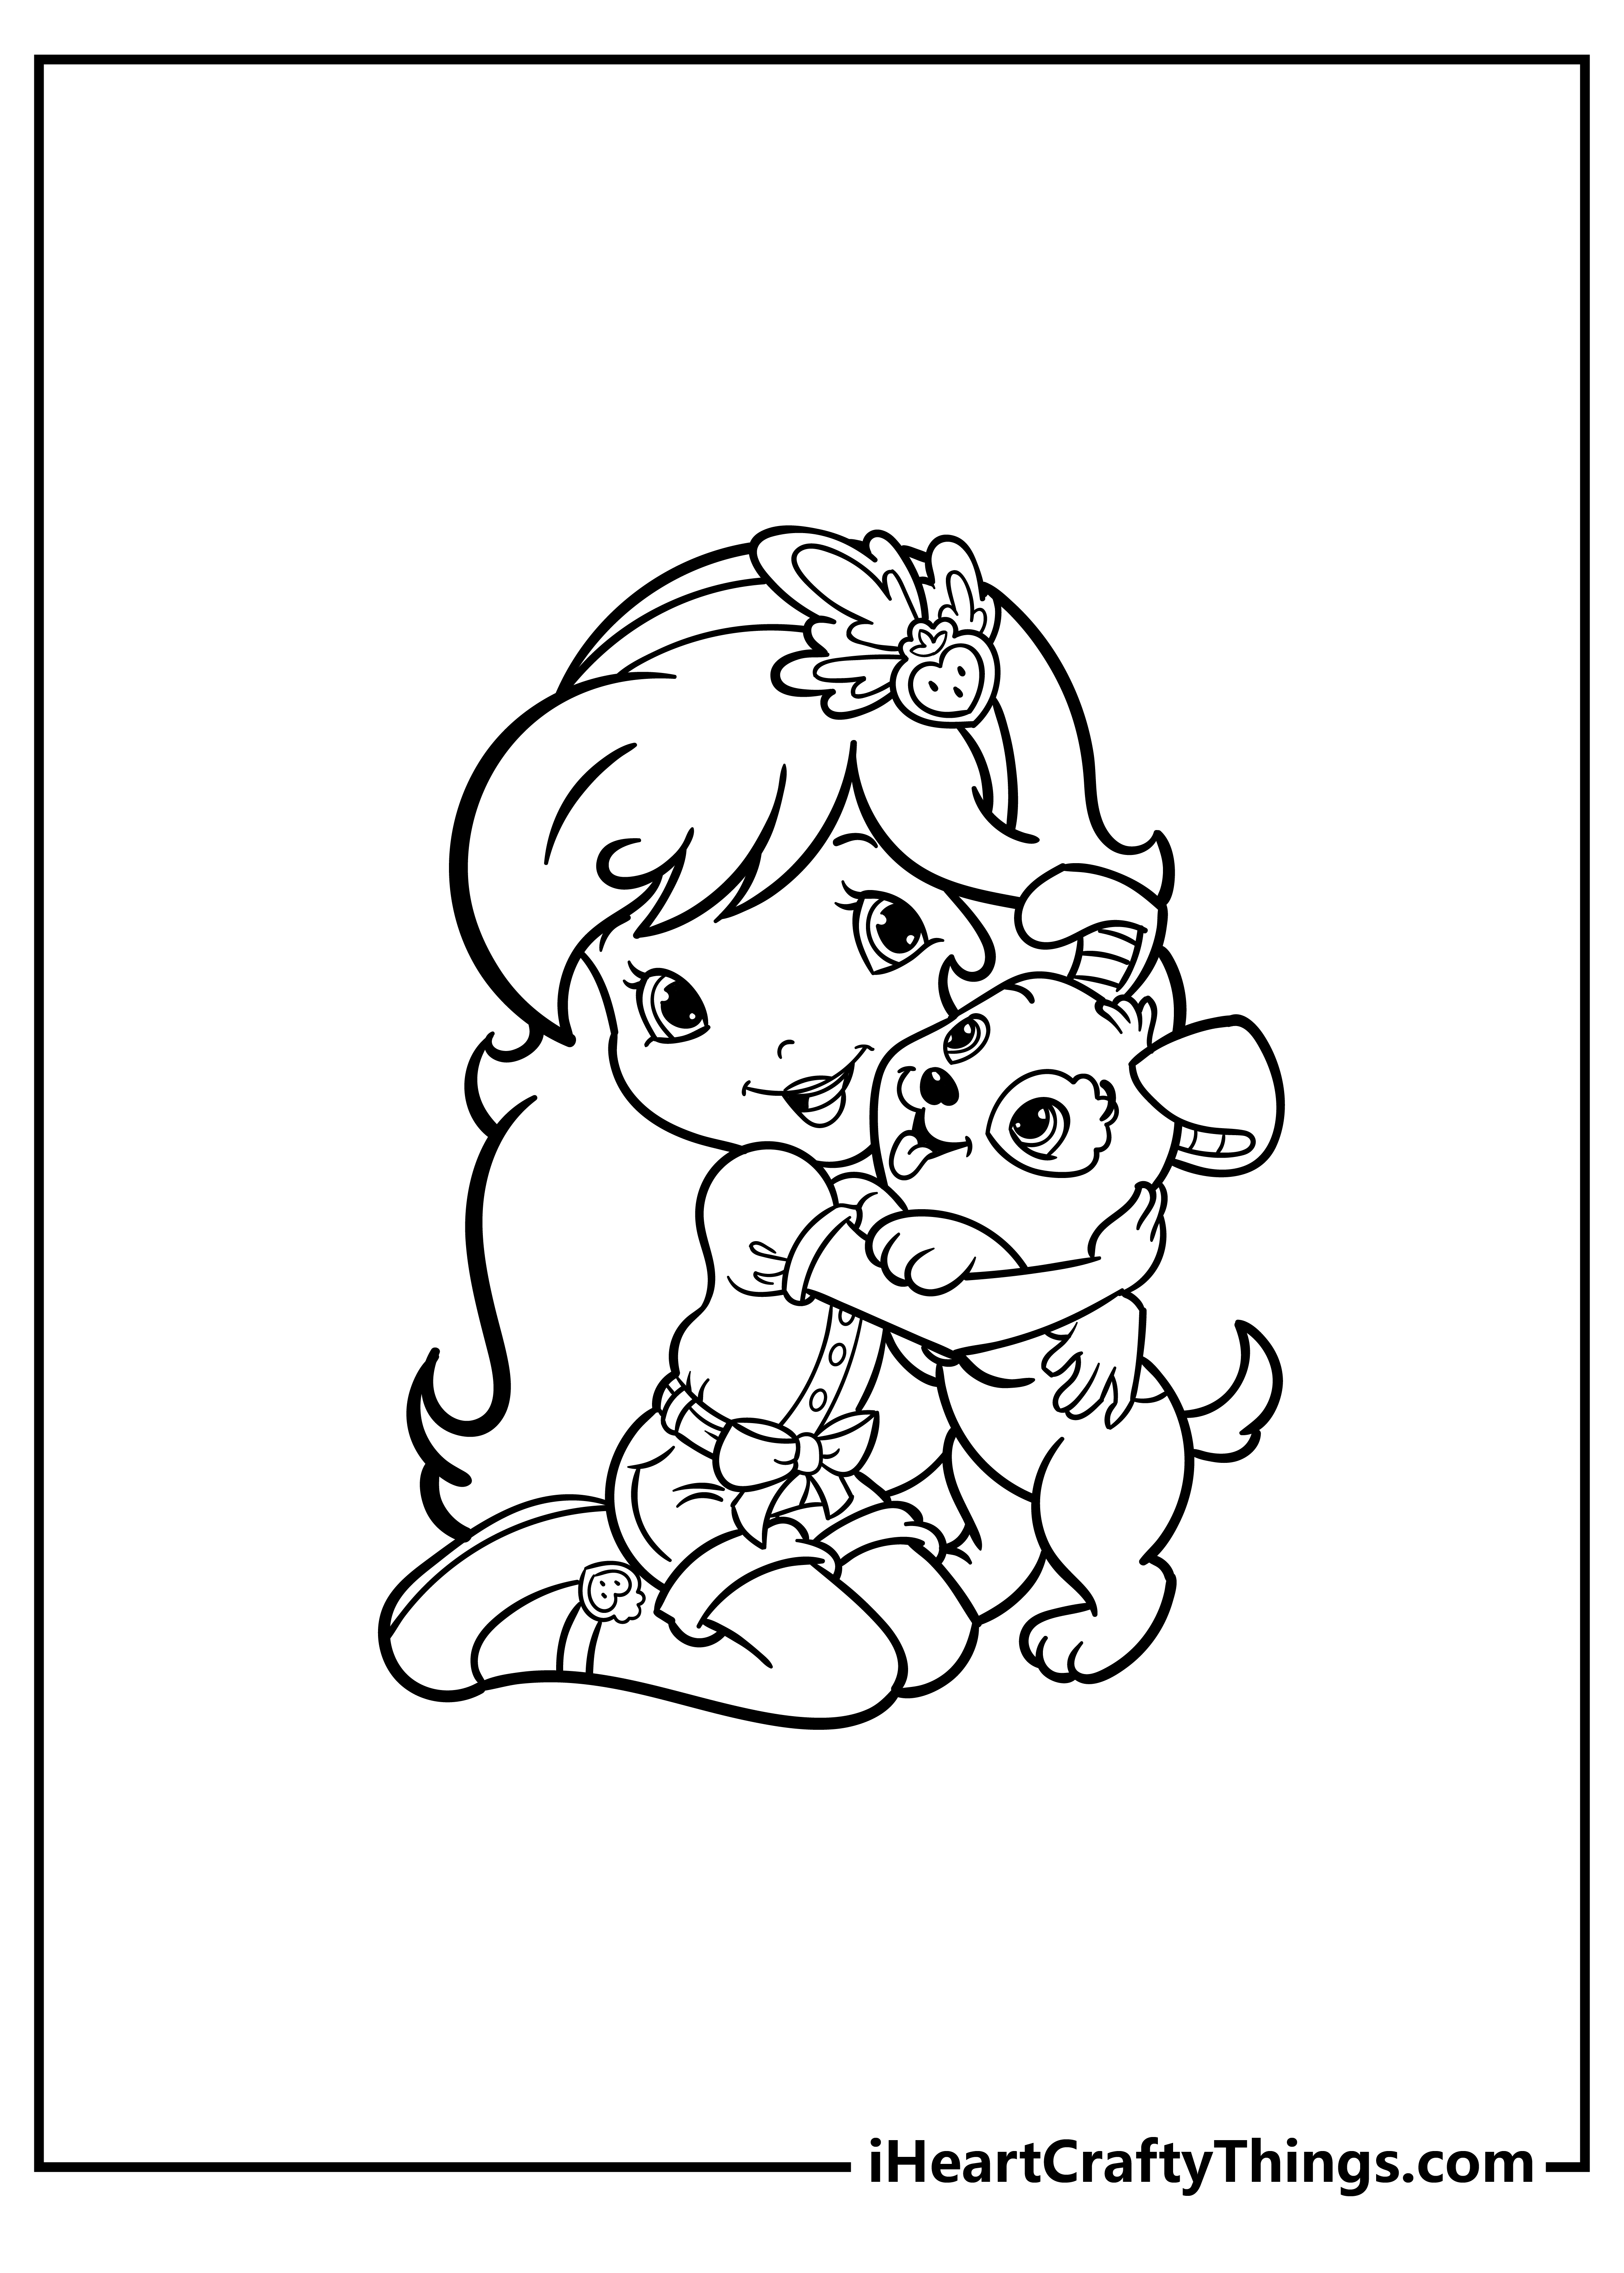 Strawberry Shortcake Coloring Book for adults free download